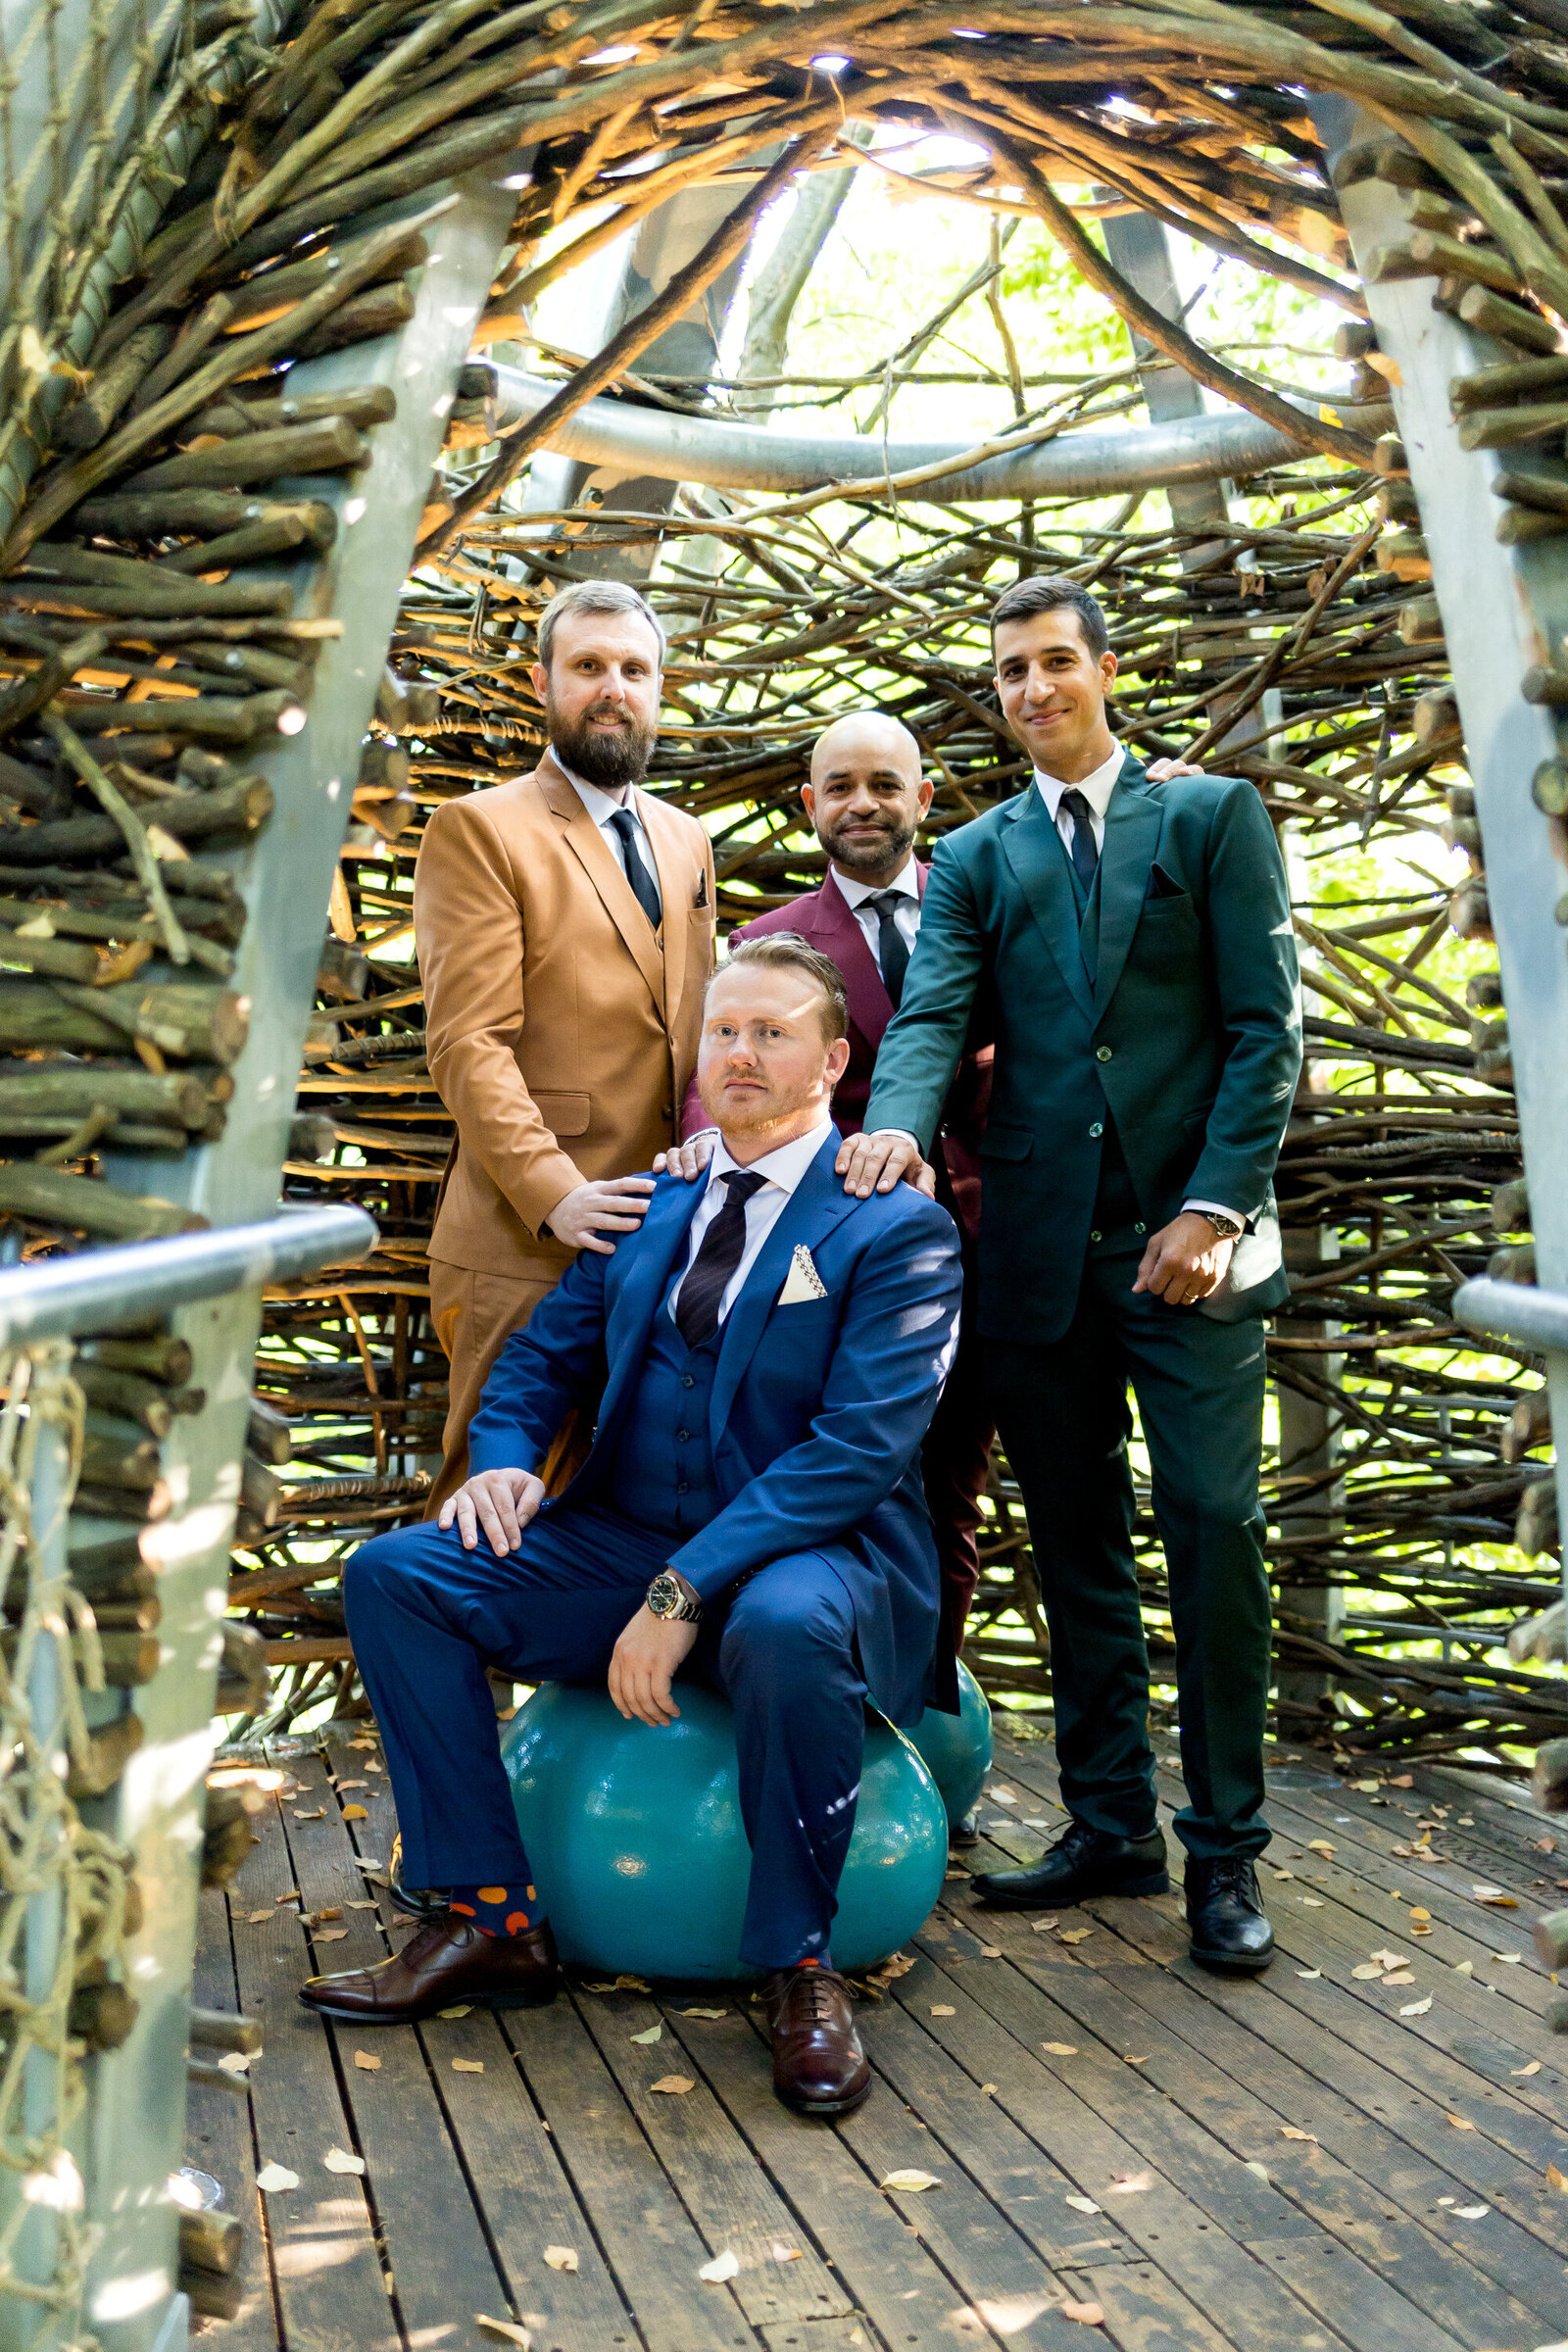 4 groomsmen posing in arboretum. The groomsmen are wearing fall coloring suits (red, blue, orange, green, and yellow).